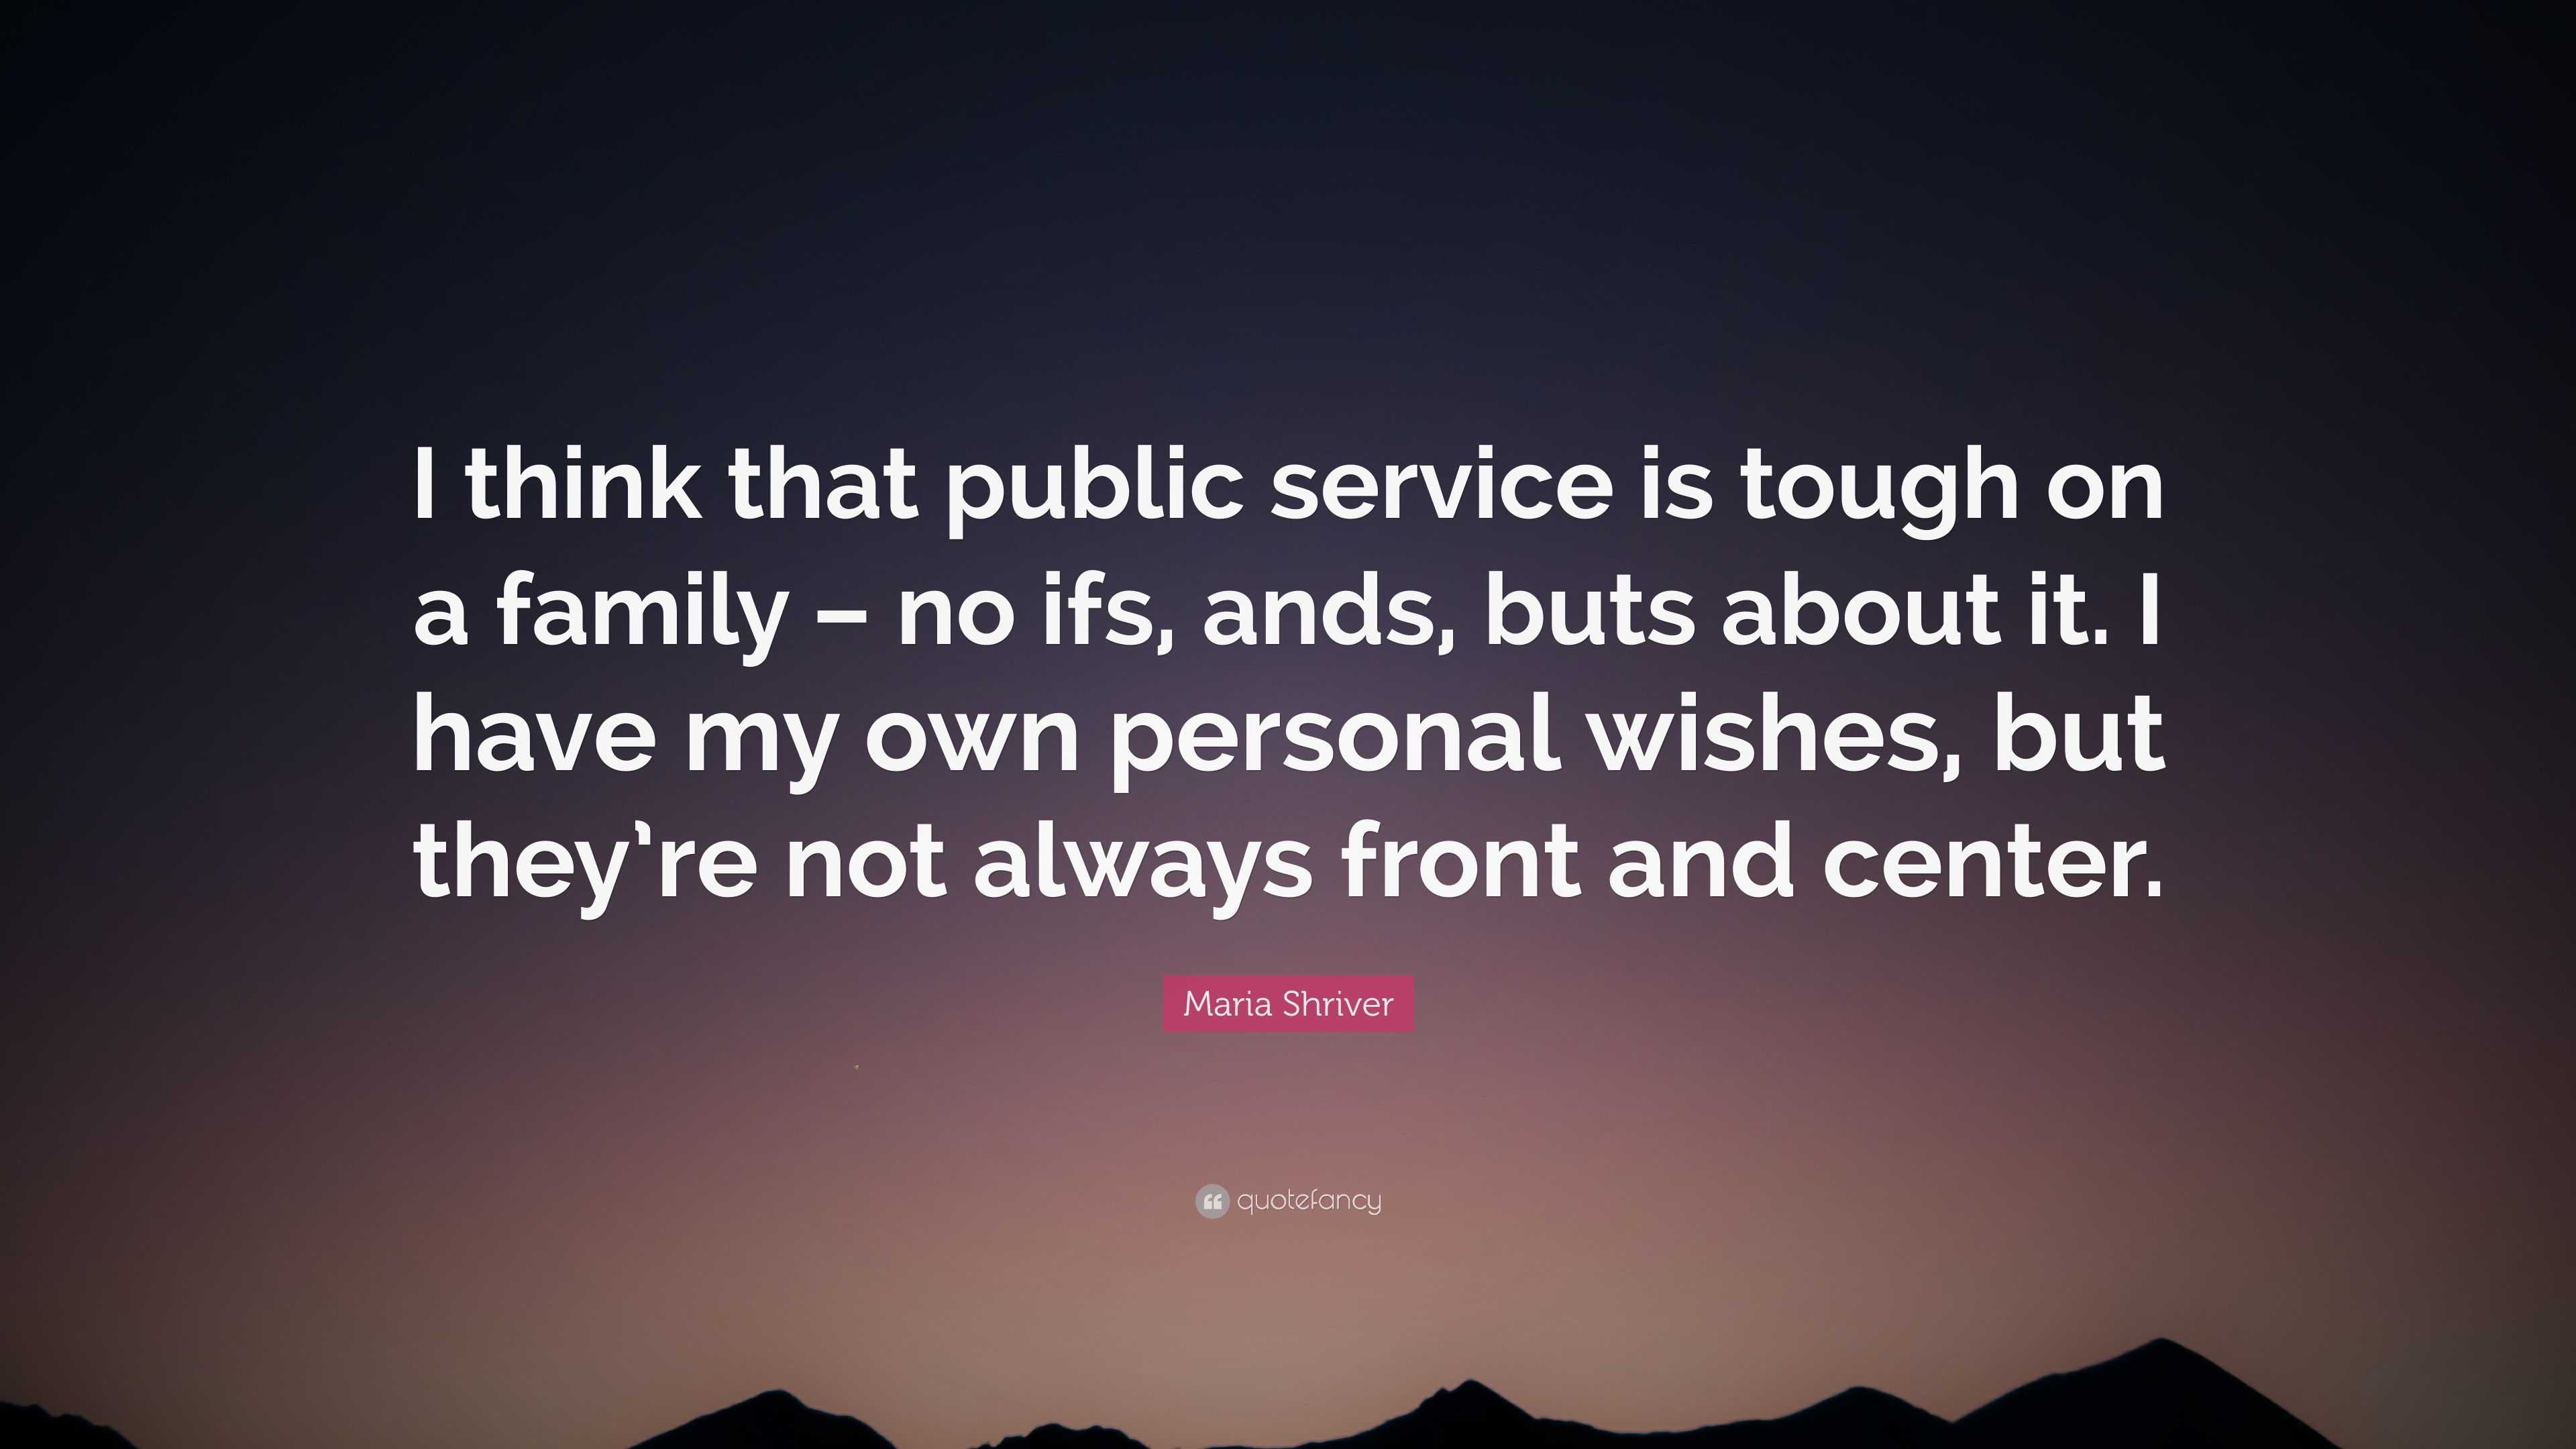 Maria Shriver Quote: “I think that public service is tough on a family